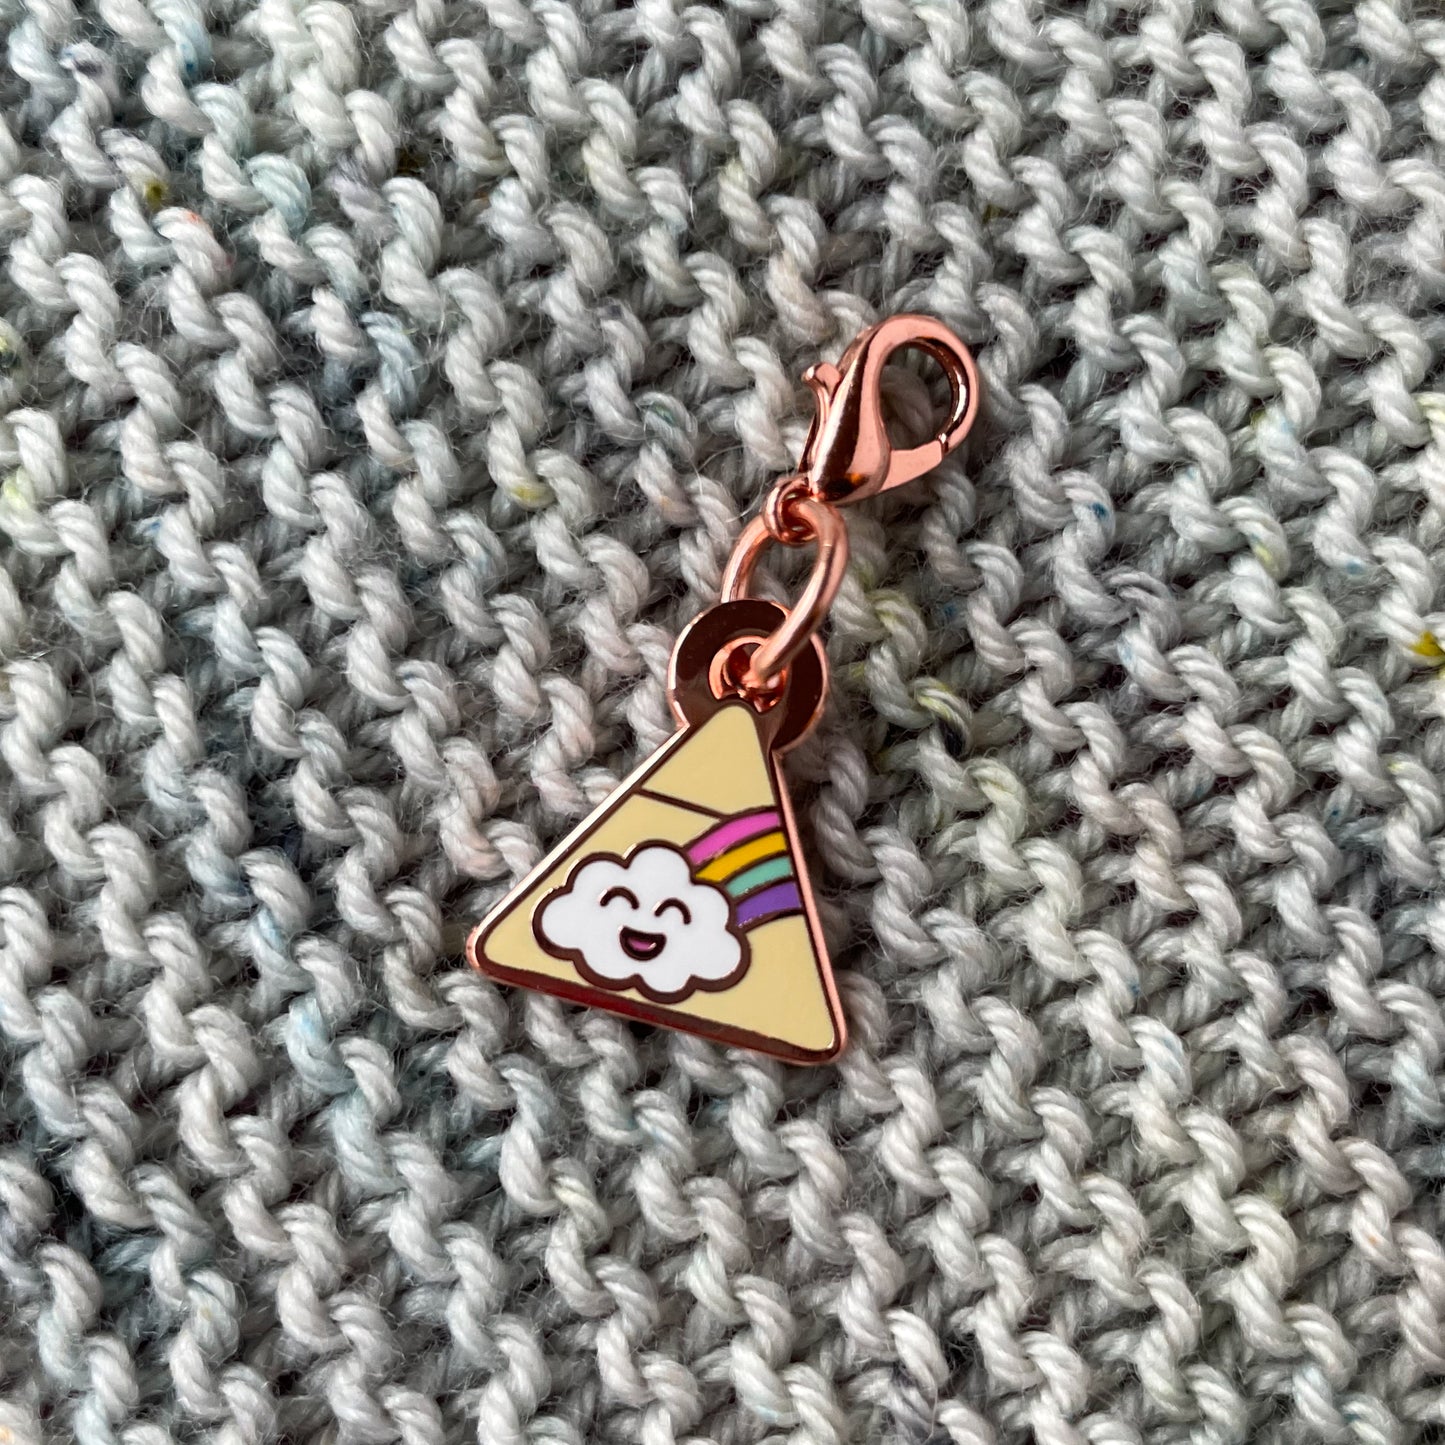 A triangle charm with a happy rainbow cloud on it. The charm is on a background of grey garter stitch knitting.